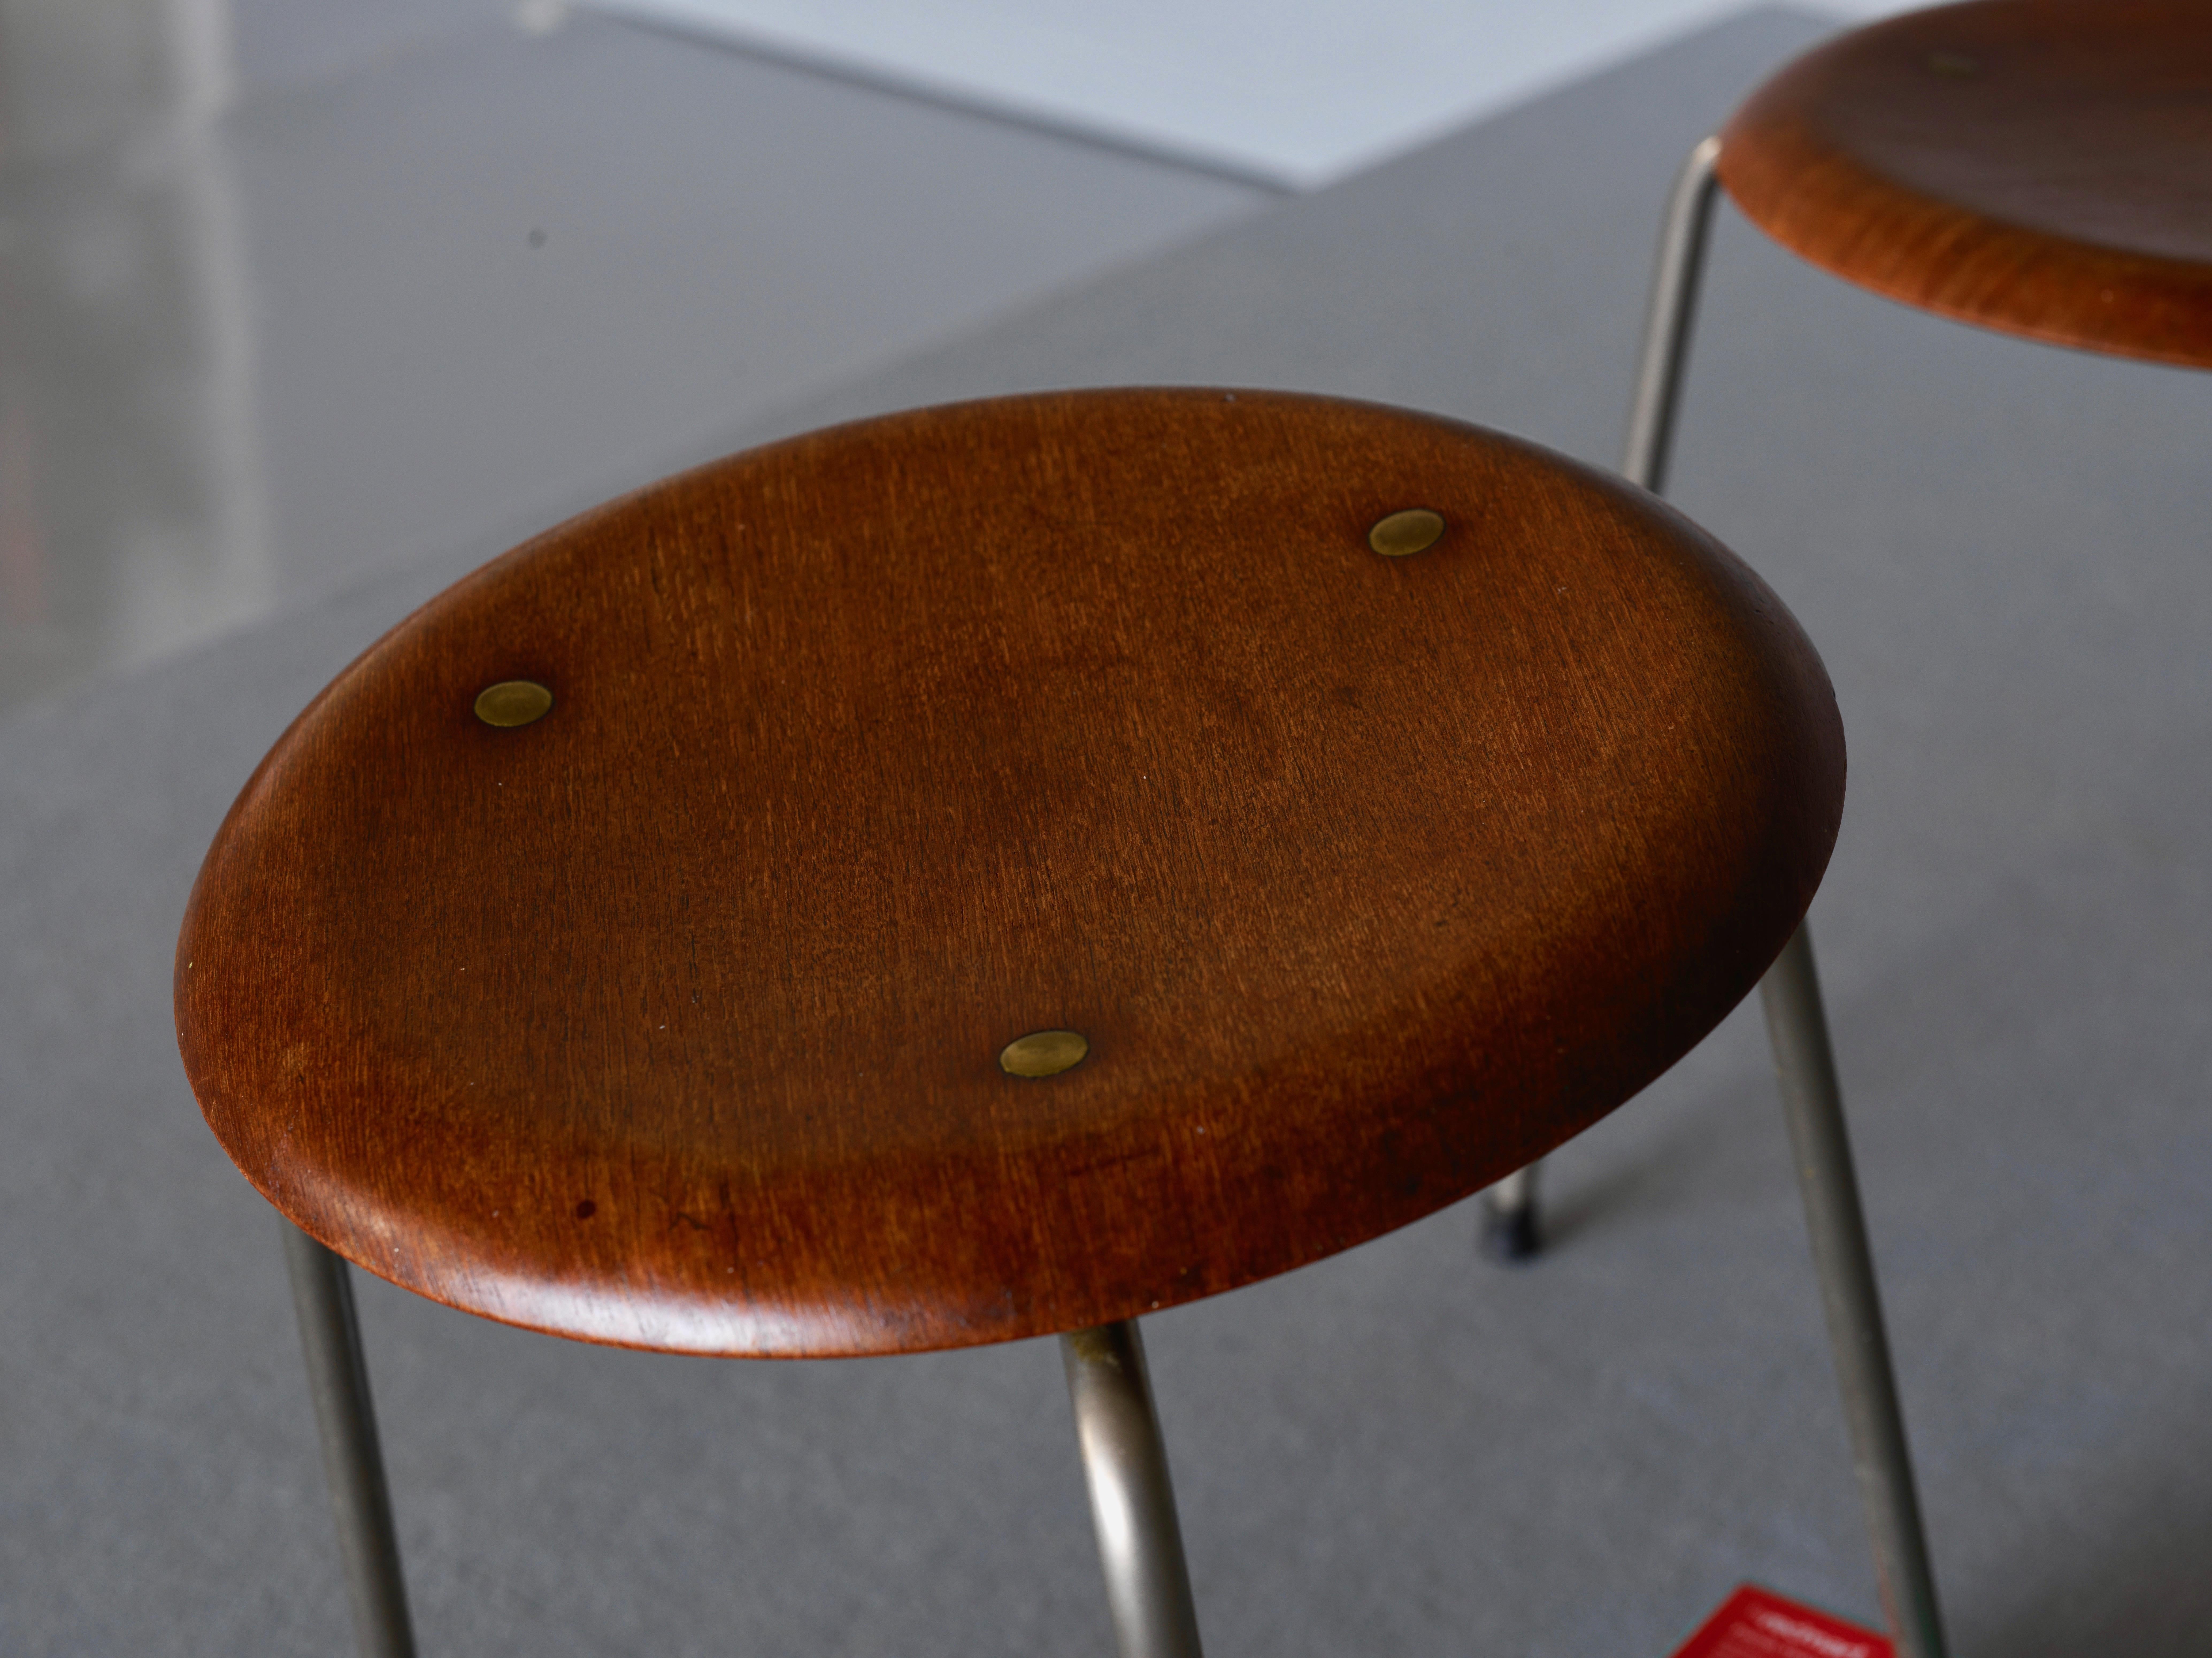 A pair of stools by Arne Jacobsen for Fritz Hansen, model DOT. They have a teak seat with a chrome plated frame. Original label “FH Denmark” remains.
Measures: H 46 D 33.
   